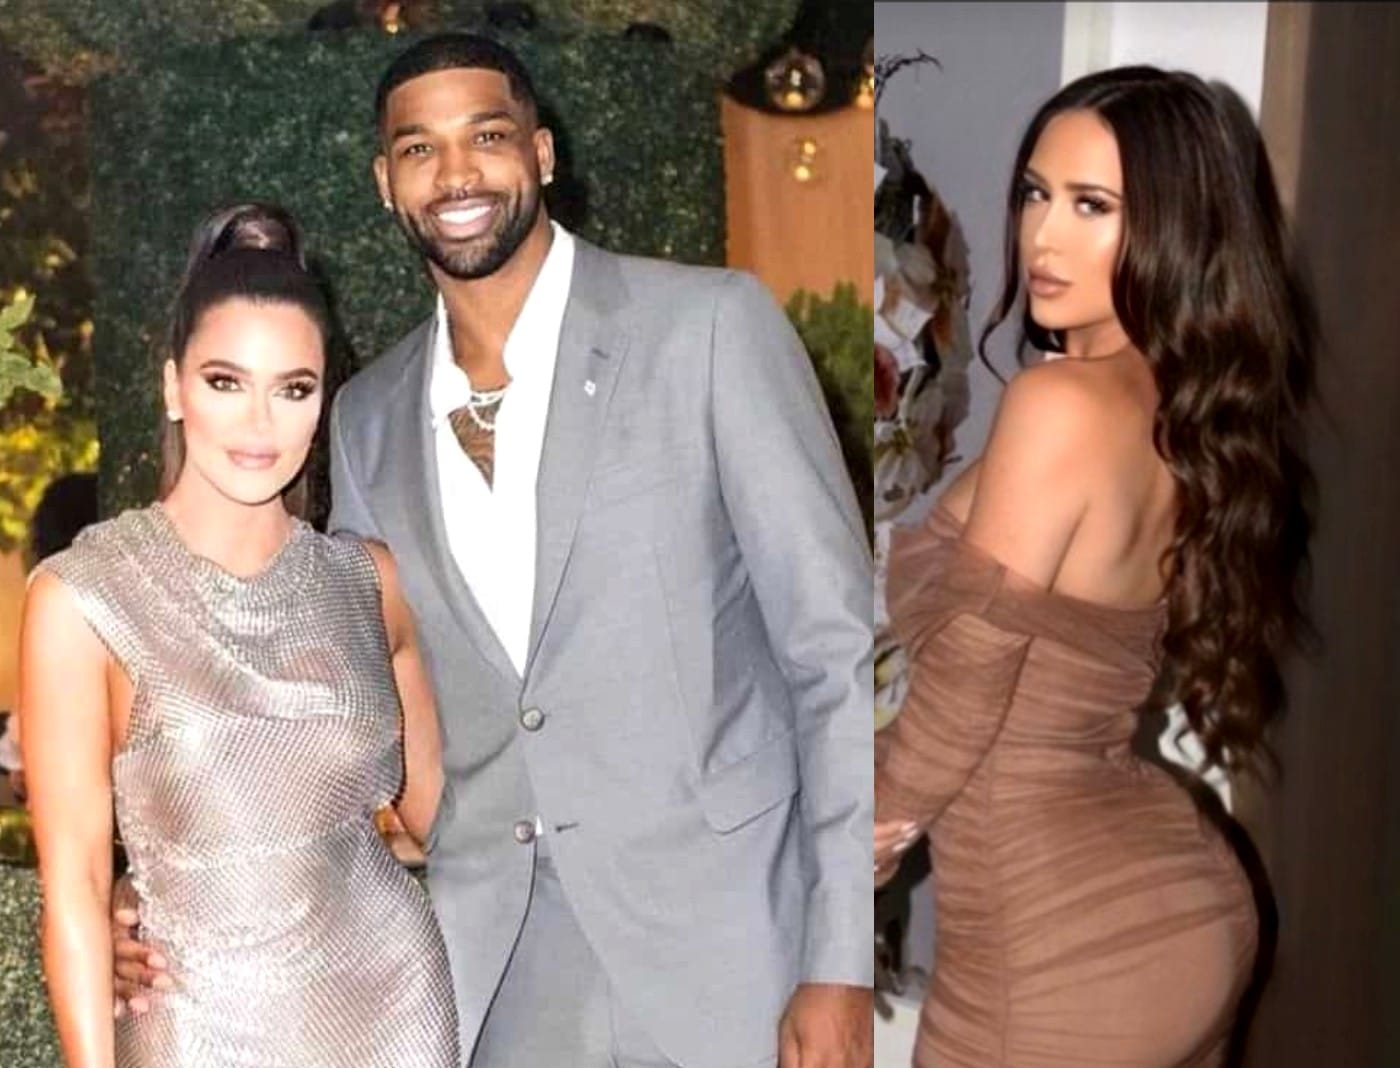 Paternity Test Proves Tristan Thompson is Father of Maralee Nichol’s Child, NBA Star Issues Apology to Khloe Kardashian